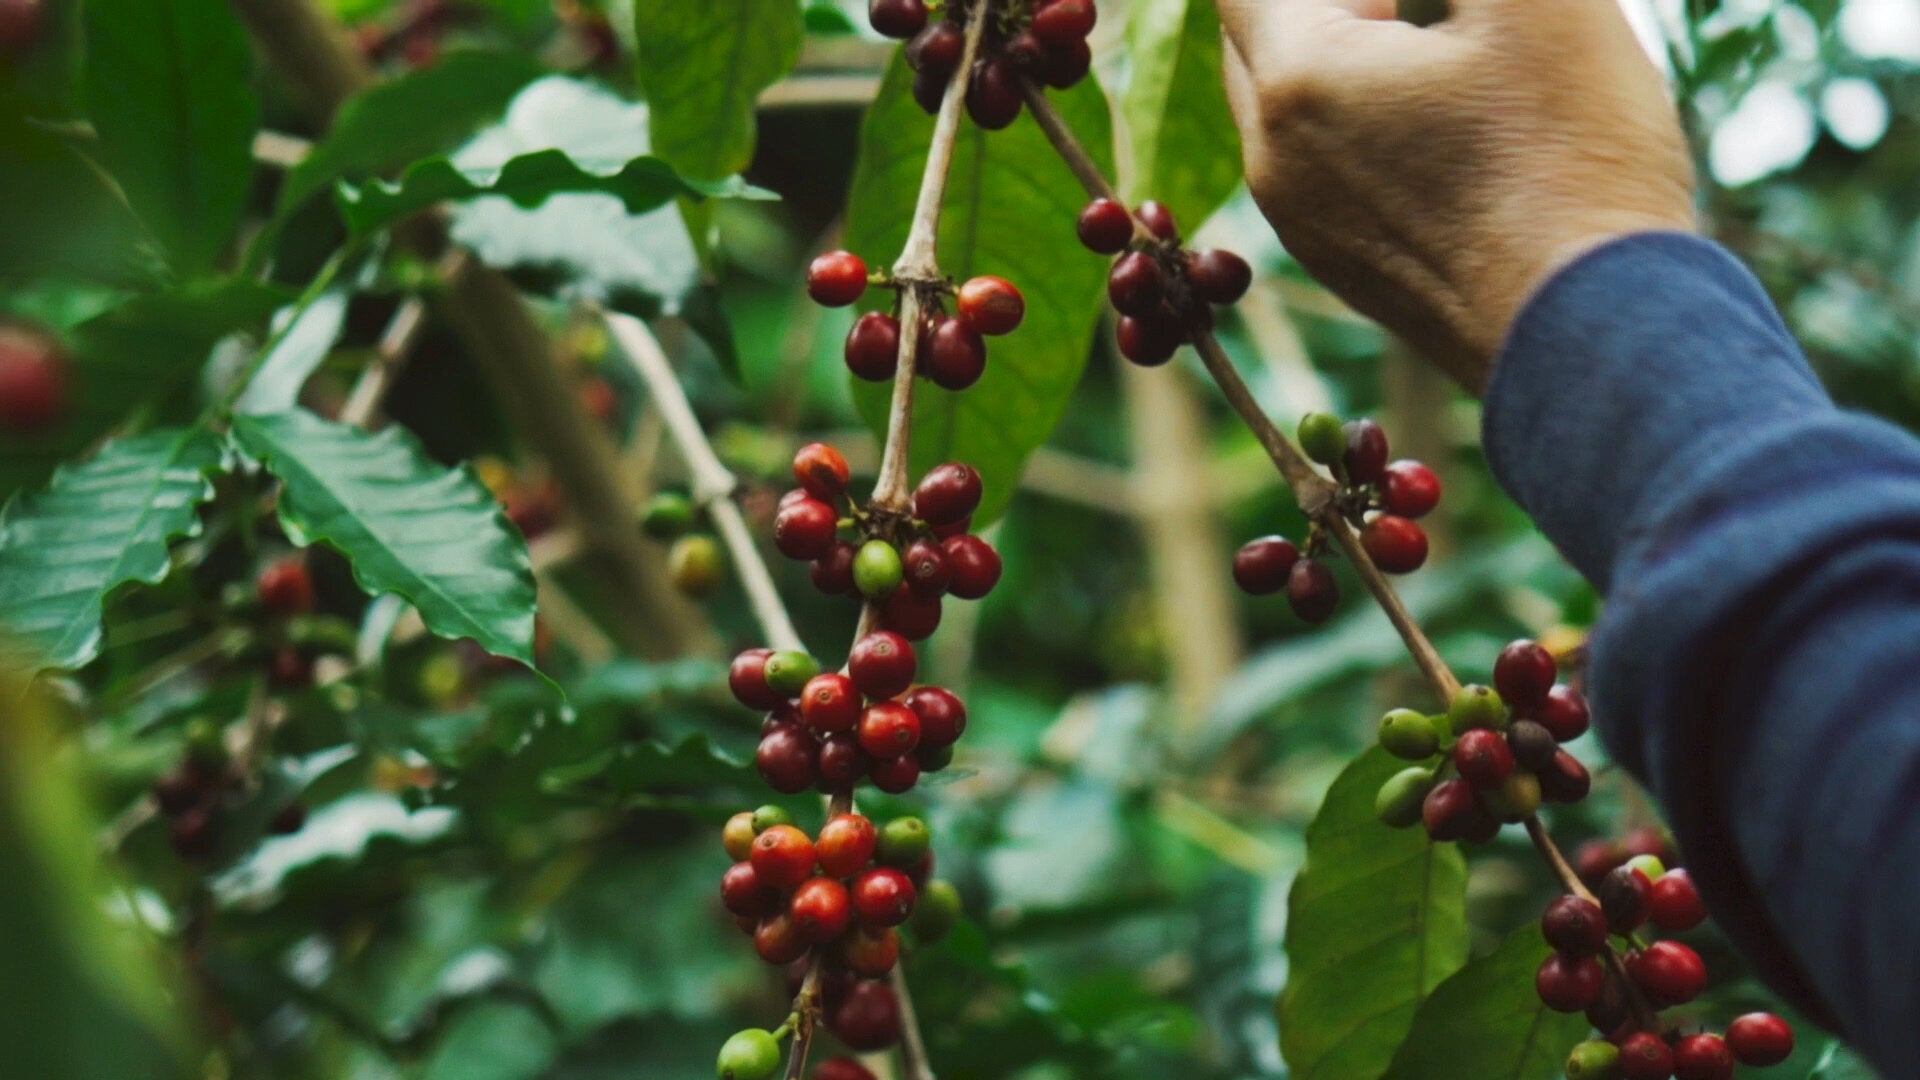 Coffee Cherry is picked by hand when bright red 